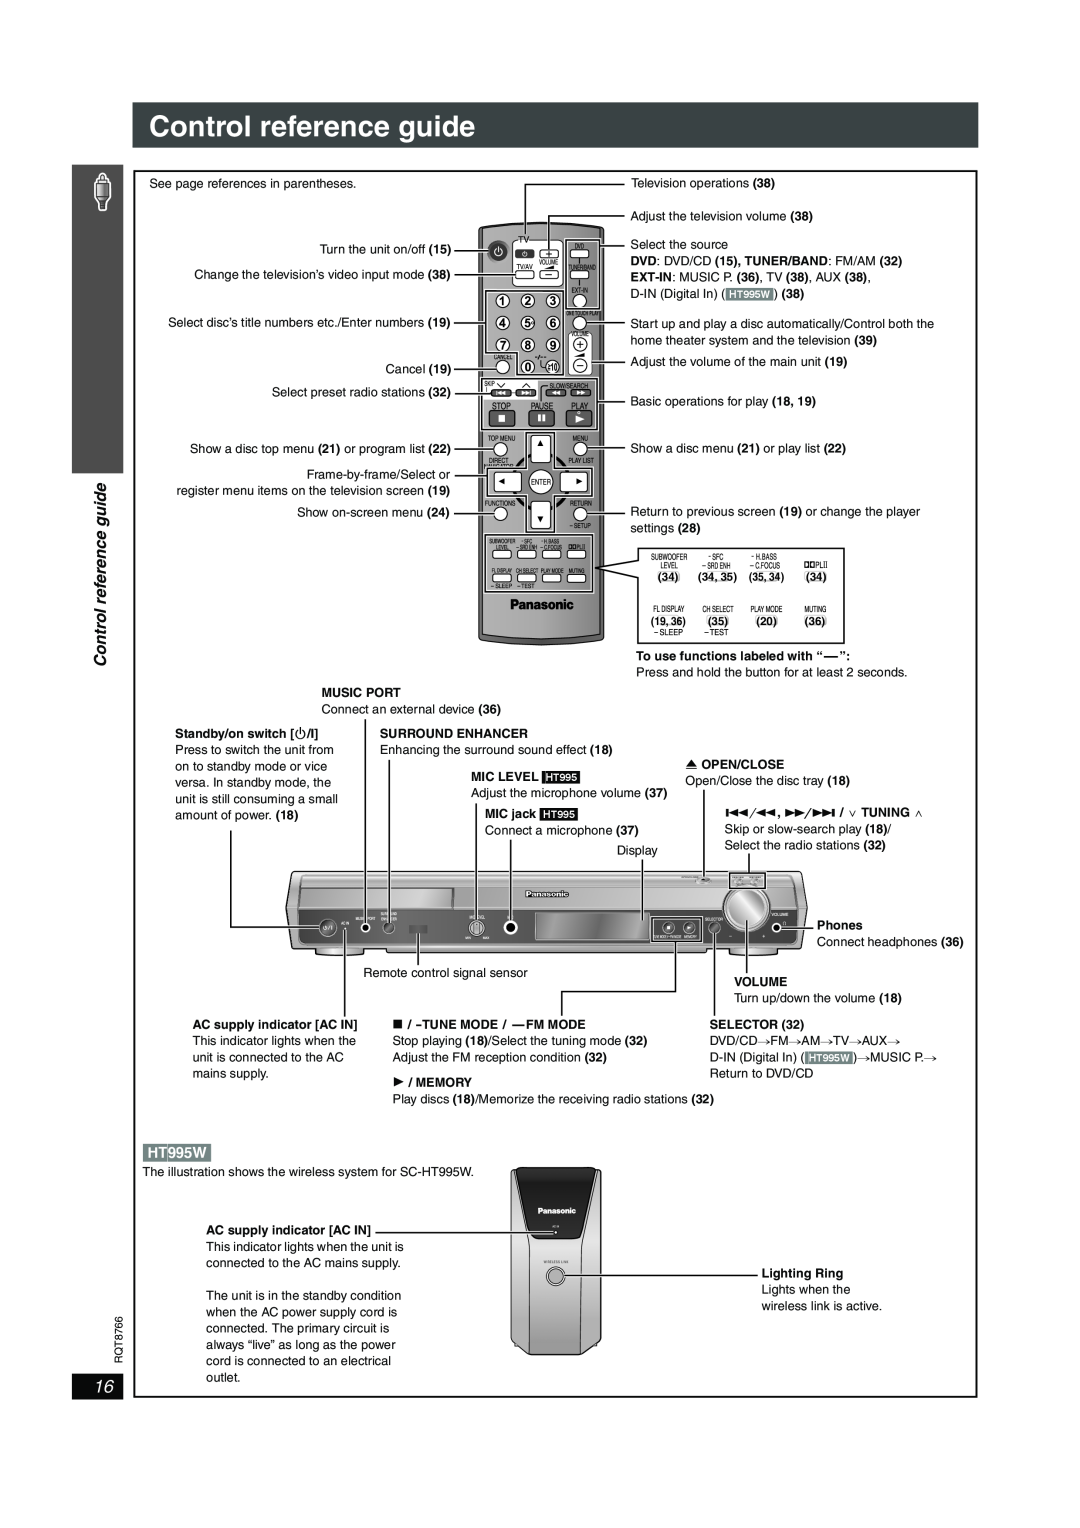 Panasonic SC-HT995W operating instructions Control reference guide 